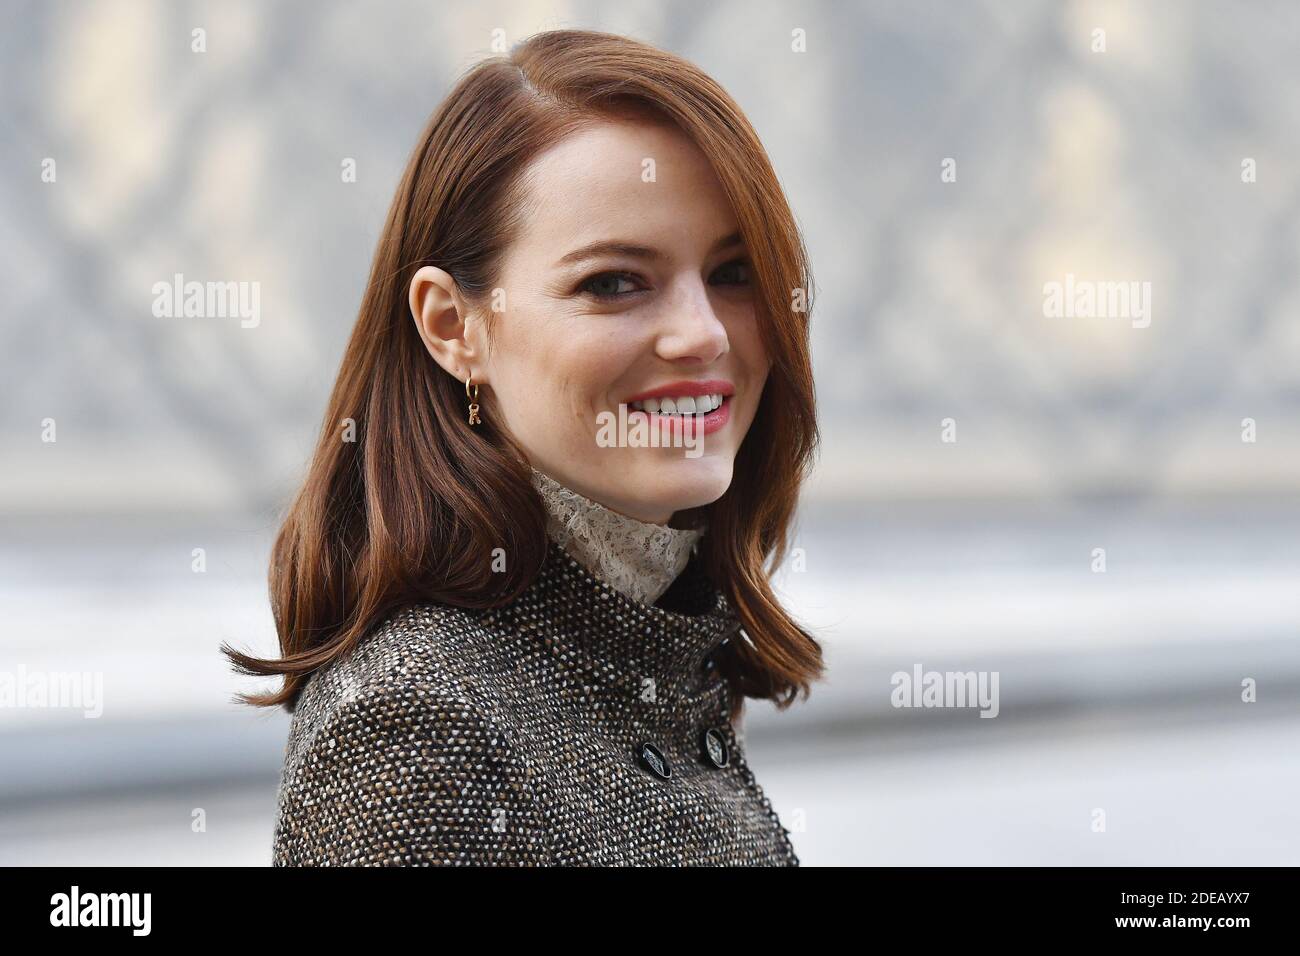 Emma Stone attends the Louis Vuitton show as part of the Paris Fashion Week  Womenswear Fall/Winter 2019/2020 on March 05, 2019 in Paris, France. Photo  by Laurent Zabulon/ABACAPRESS.COM Stock Photo - Alamy